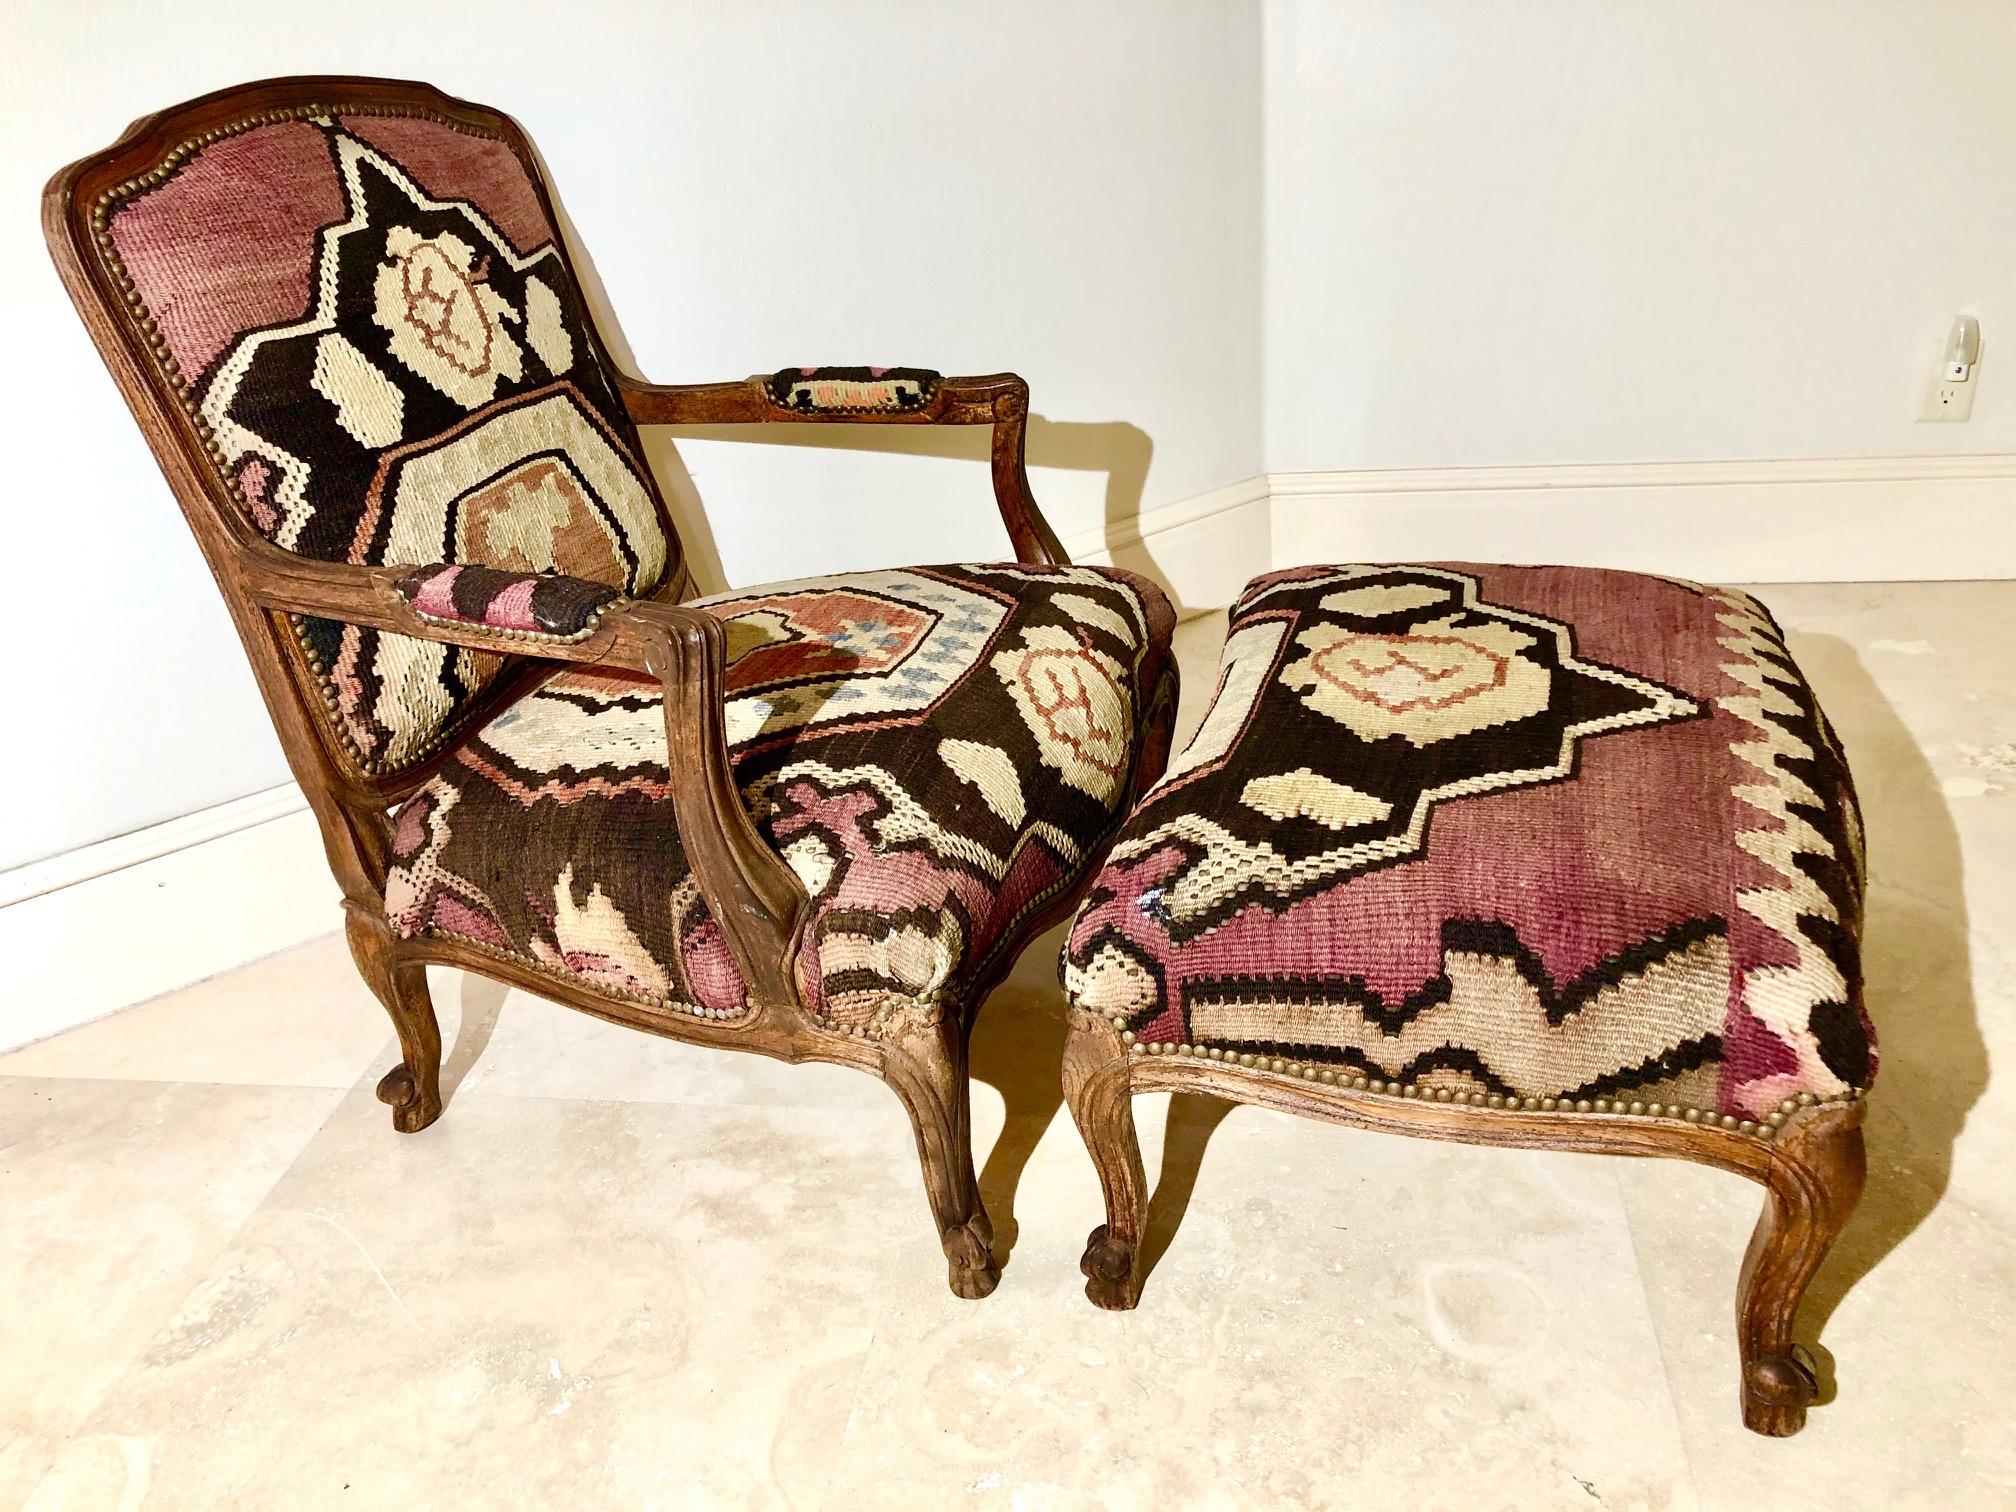 Gorgeous George Smith style, Louis XVI French chair and ottoman set
finished immaculately in vintage kilim upholstery. # 4347

Measures: Chair: H 37